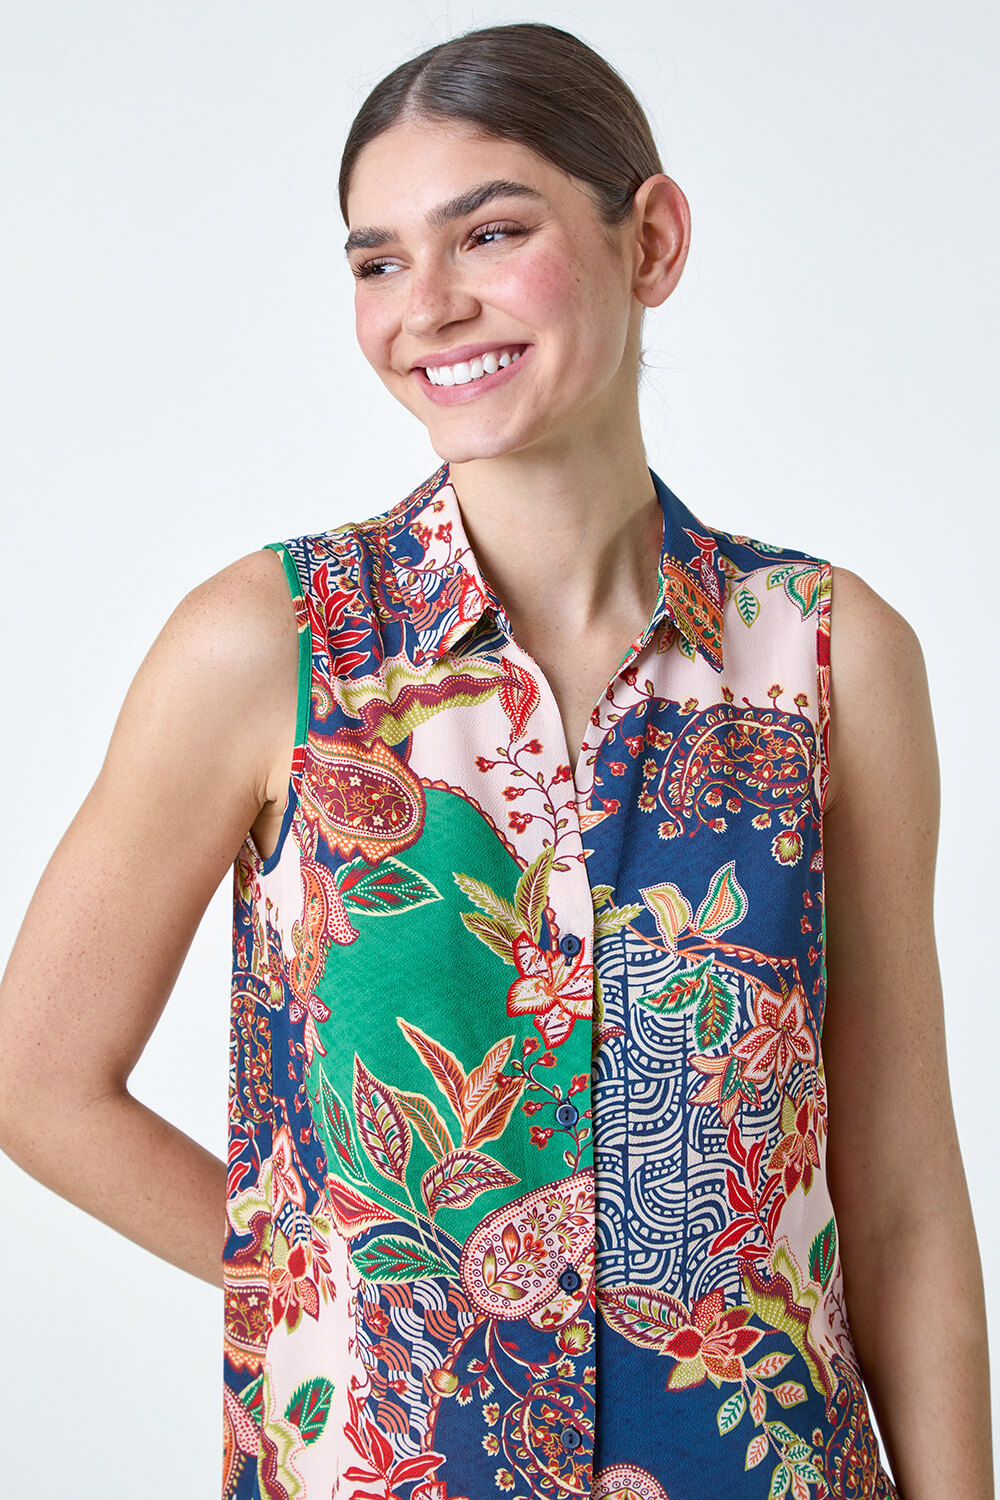 Green Paisley Floral Print Sleeveless Button Blouse, Image 4 of 5